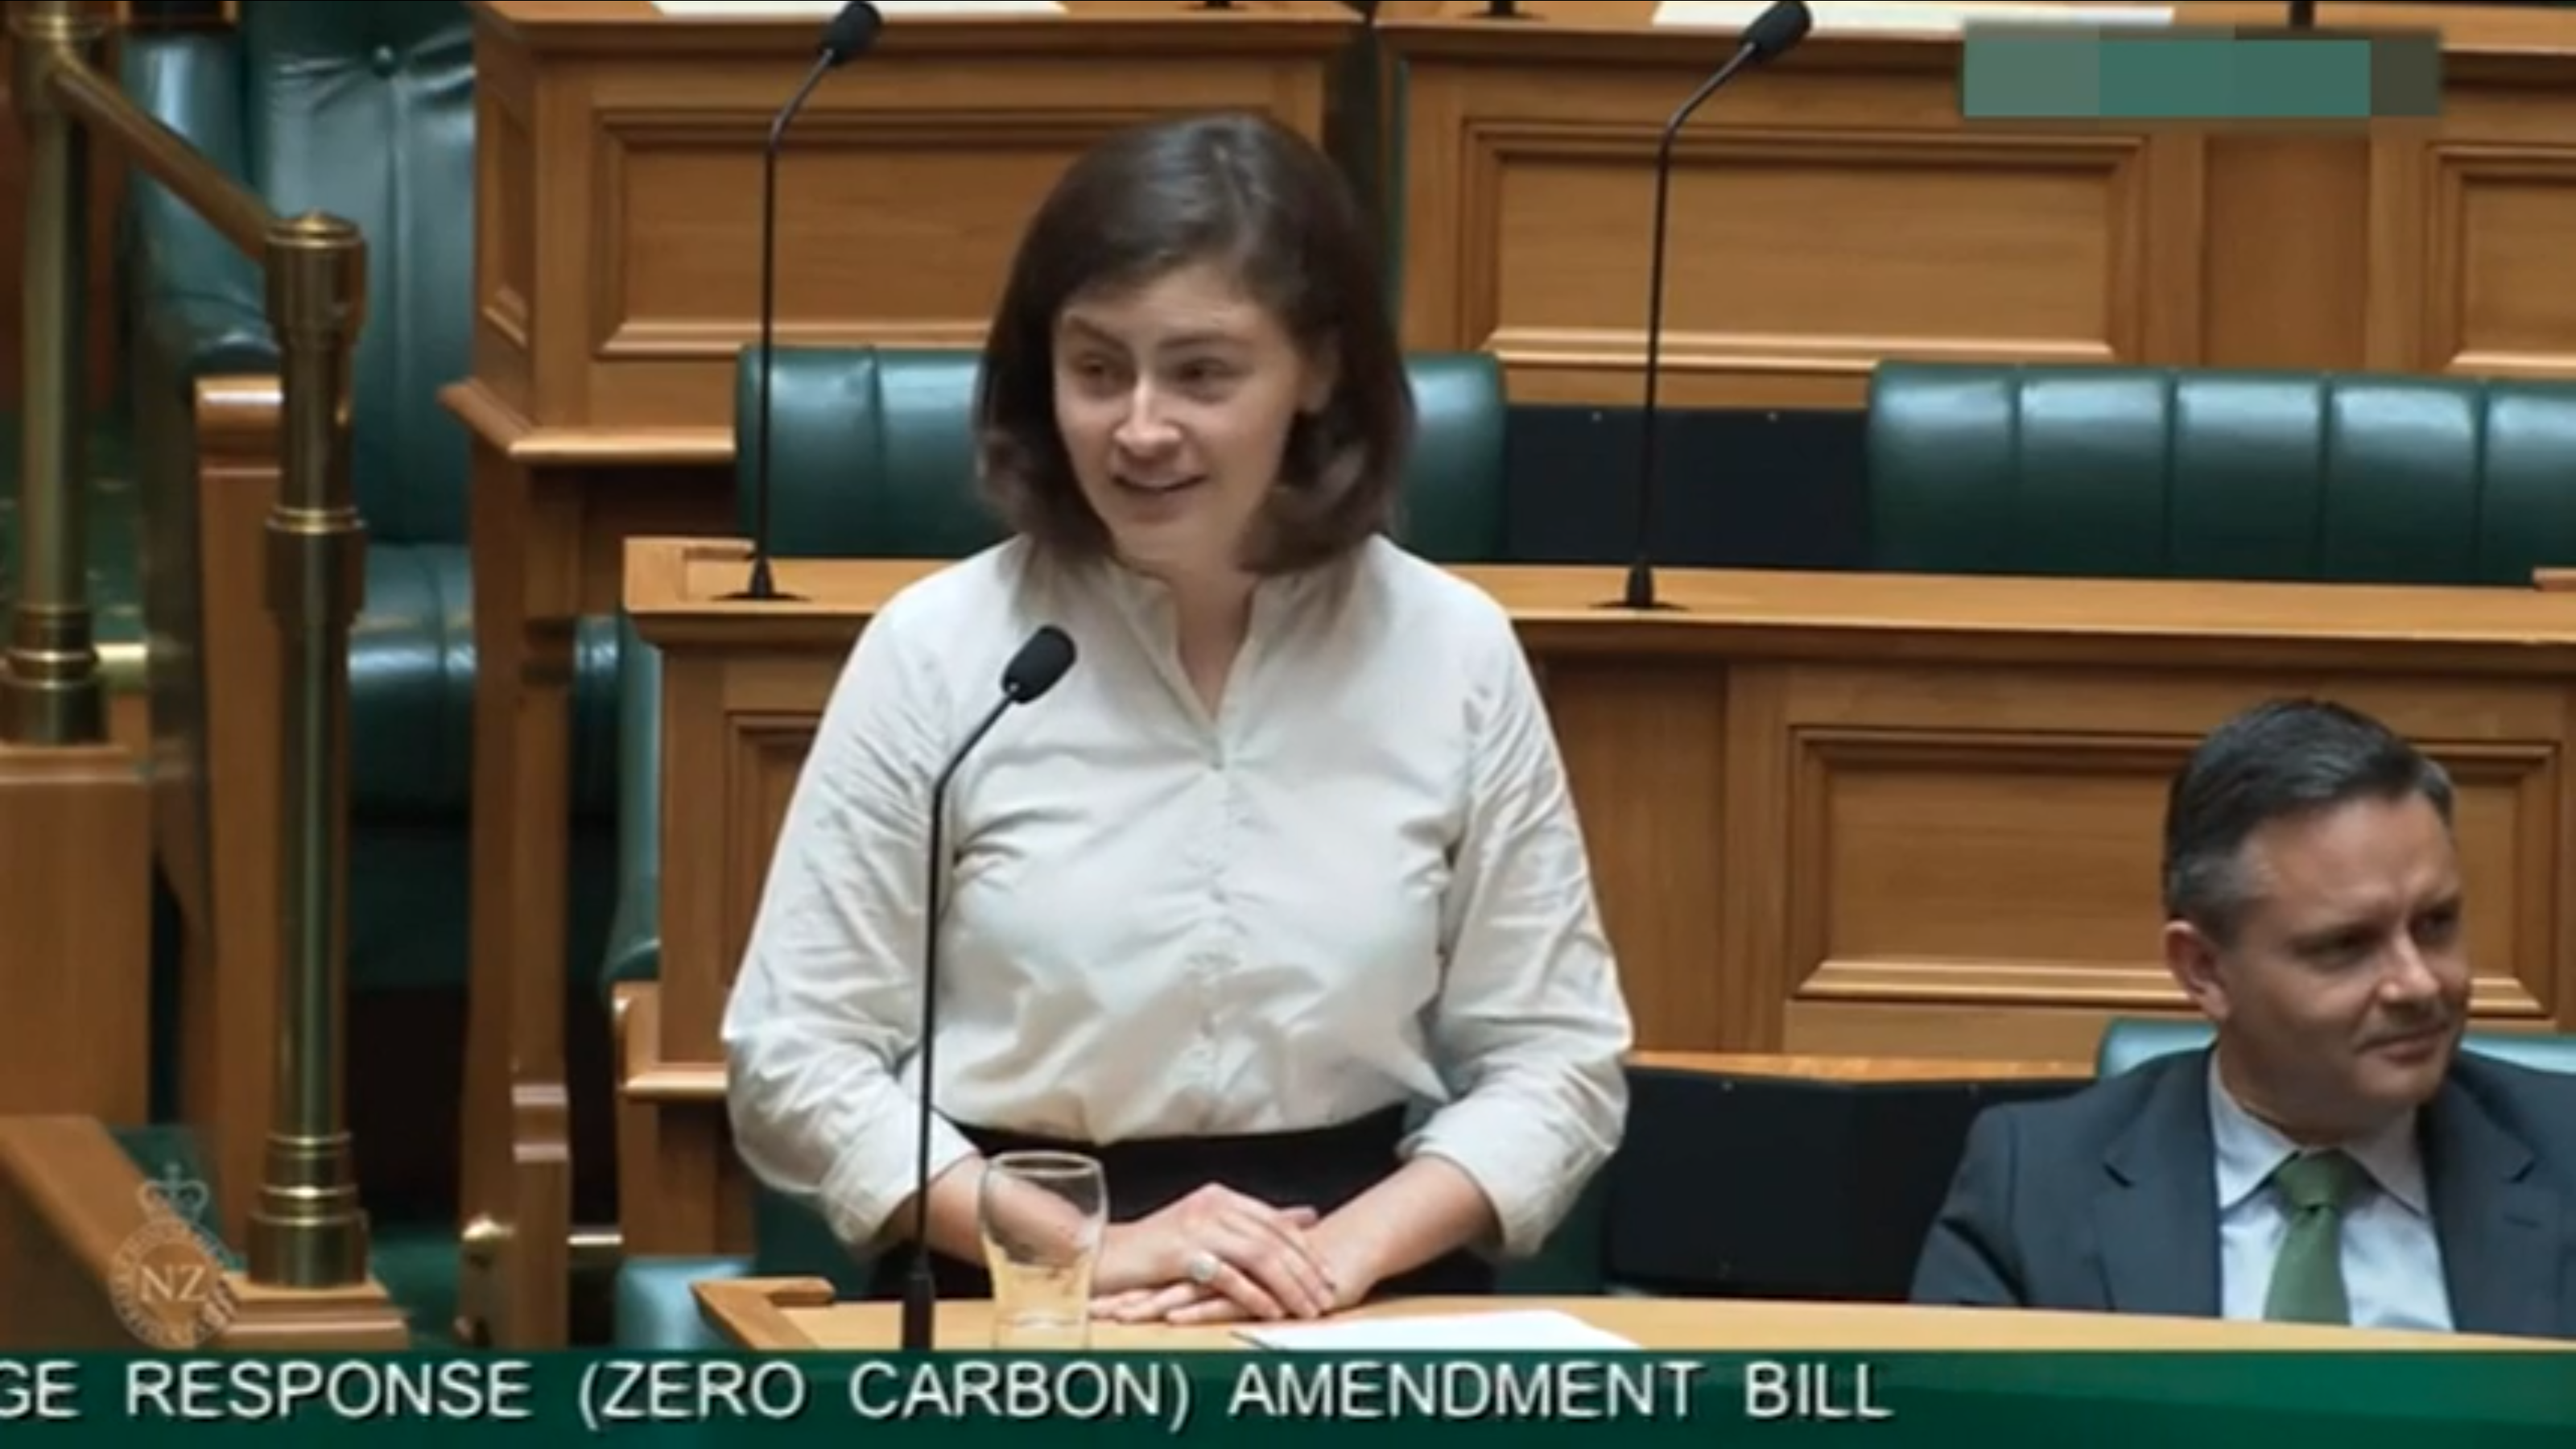 Screenshot showing the moment when Chlöe Swarbrick, a member of the New Zealand Parliament, shut down a heckler by saying, “OK, Boomer” during her speech on landmark climate legislation on Tuesday, 5 November 2019. She went on to say, “How many world leaders for how many decades have seen and known what is coming but have decided that it is more politically expedient to keep it behind closed doors? My generation and the generations after me do not have that luxury.” Photo: New Zealand Parliament